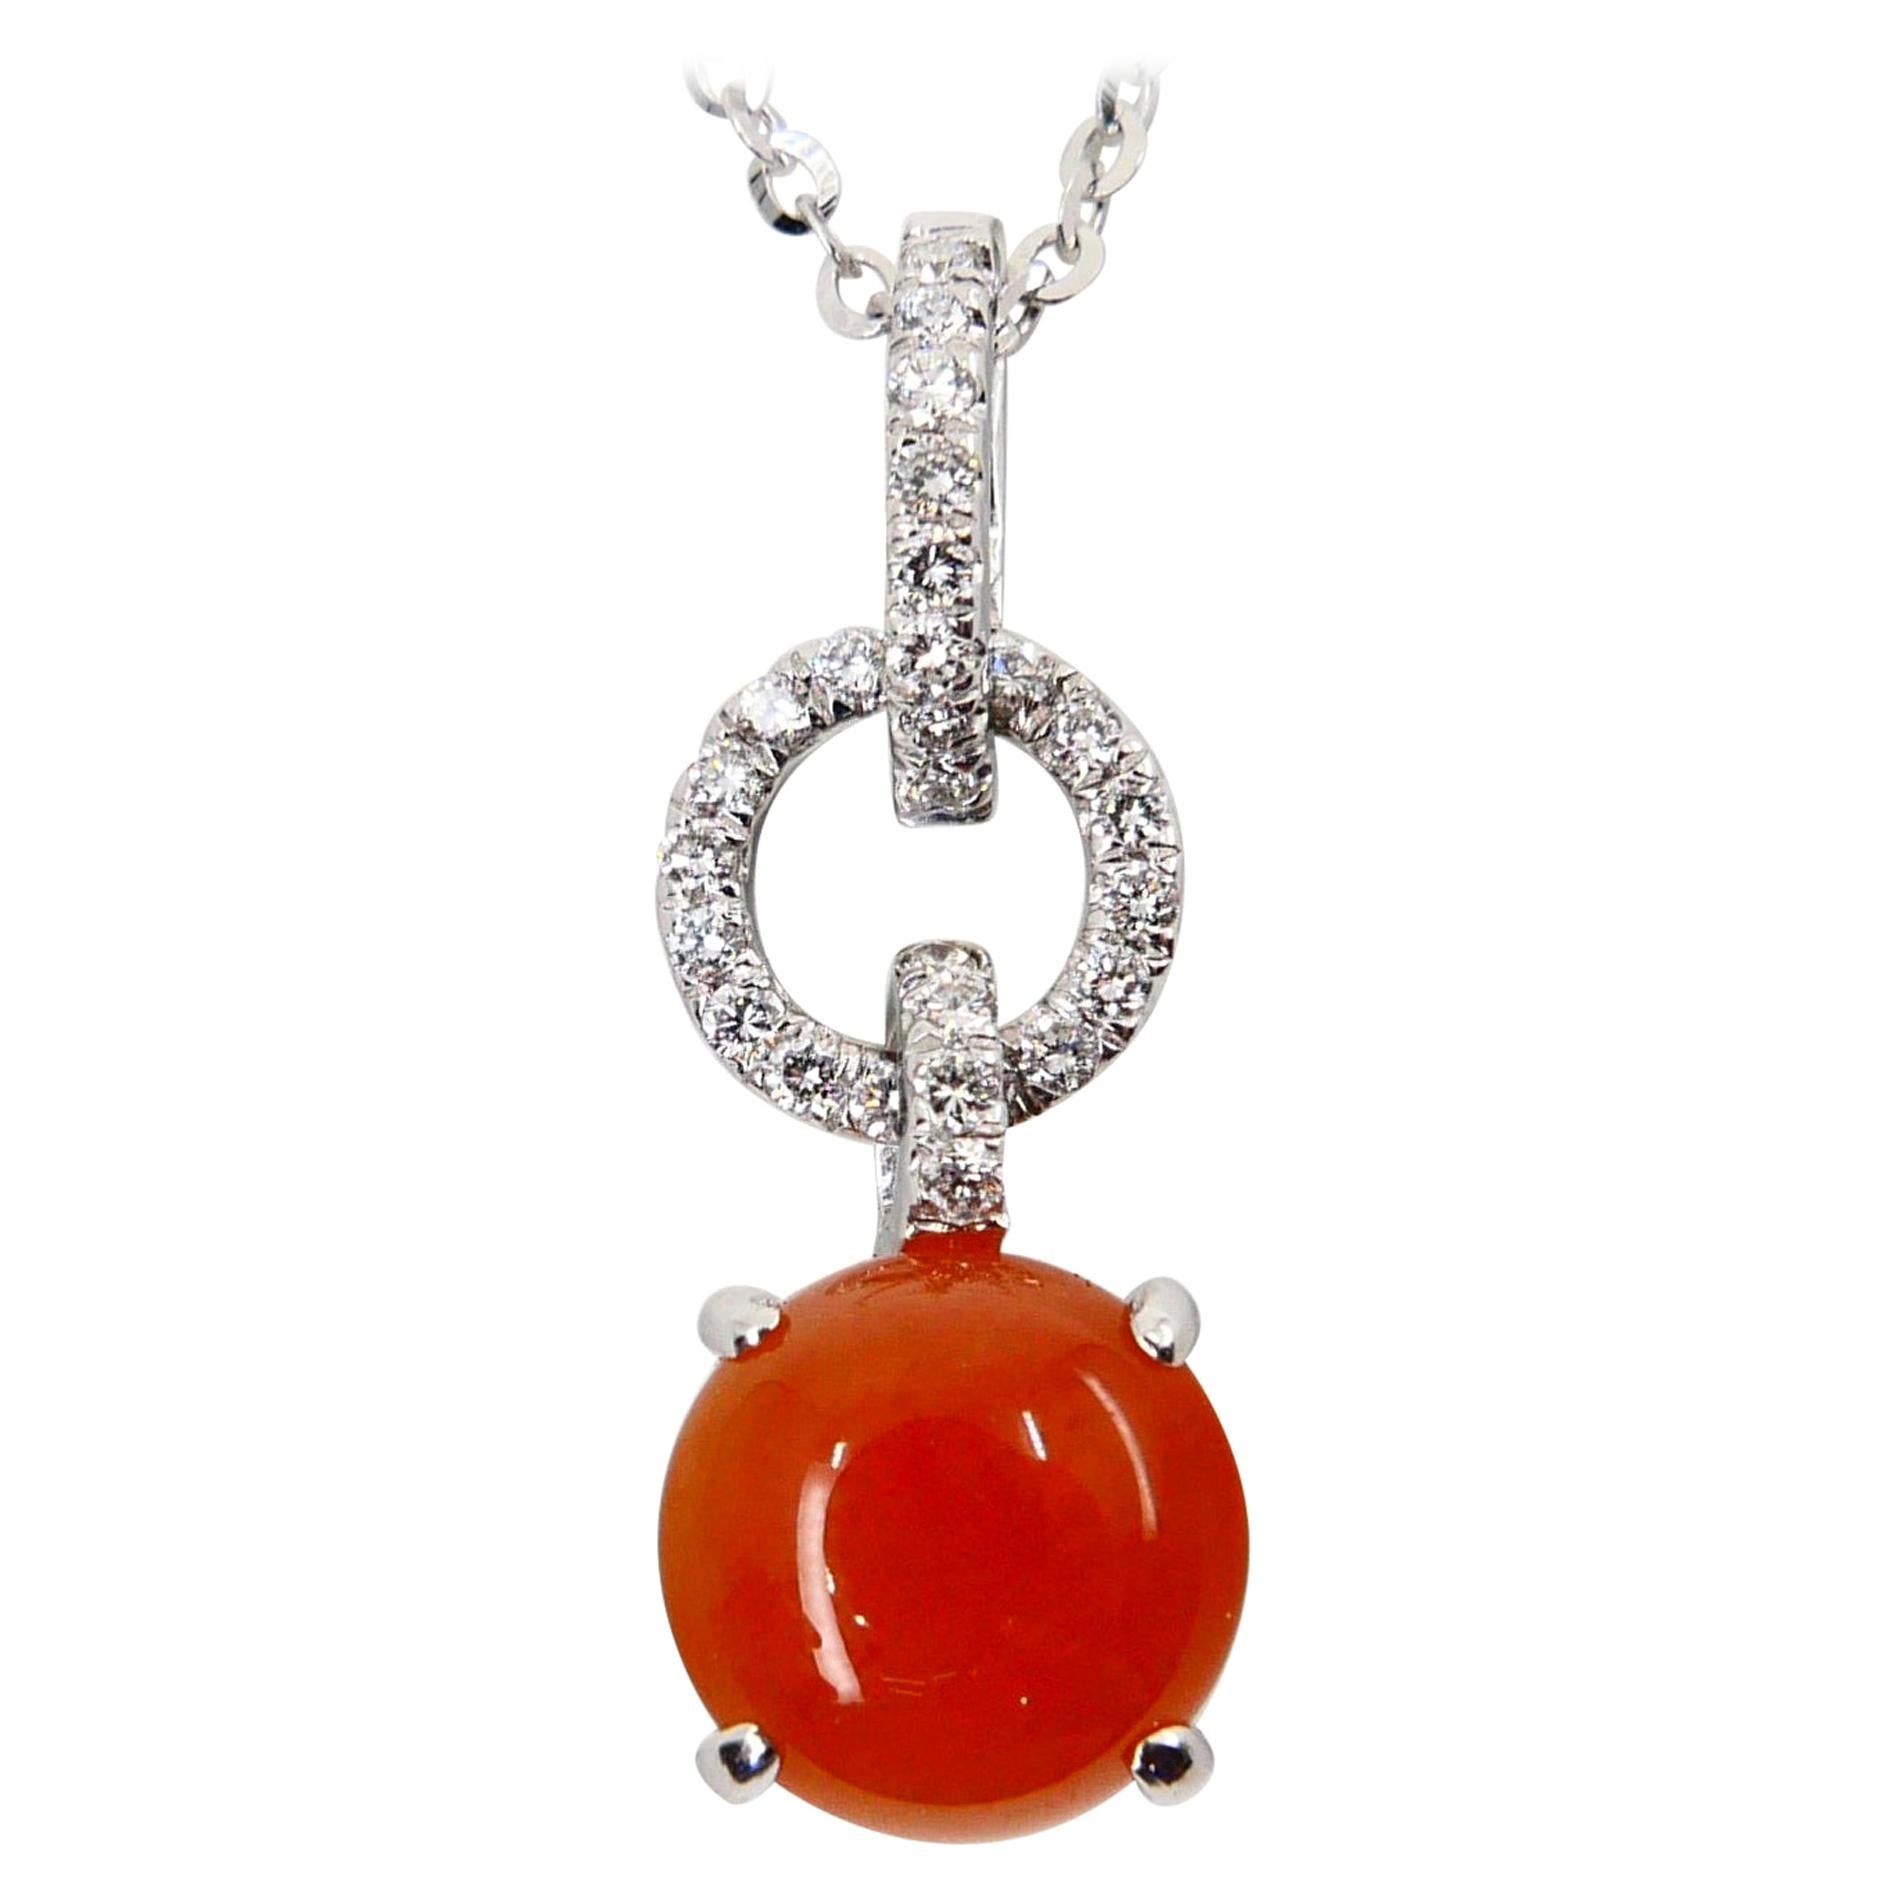 Certified Natural Type a Red Jade & Diamond Pendant Necklace, Interlinked Hoops